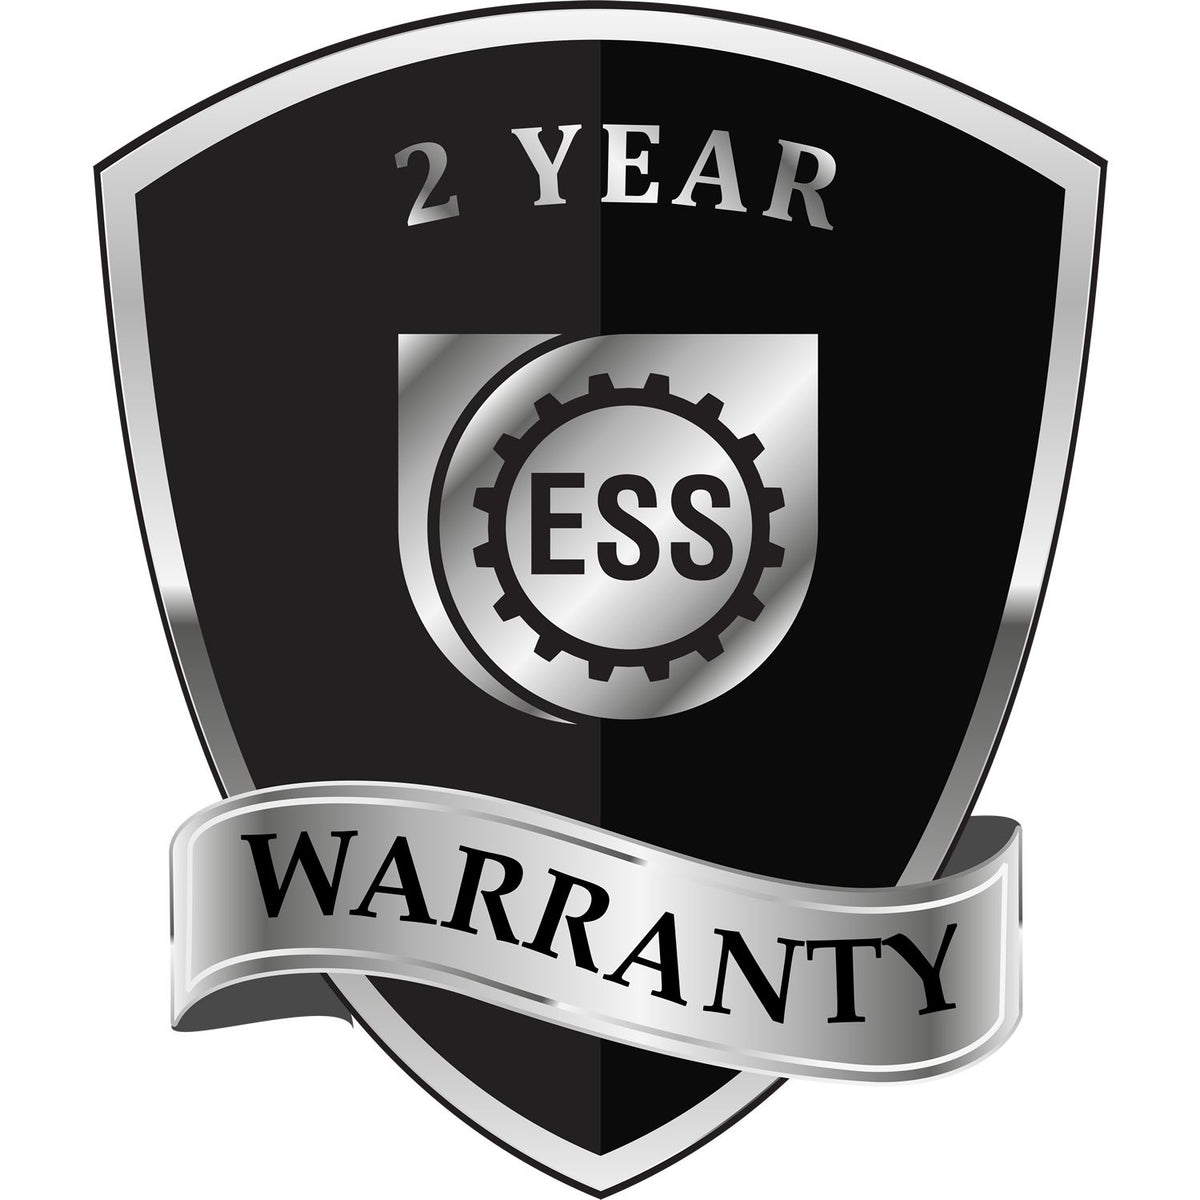 A badge or emblem showing a warranty icon for the State of Illinois Long Reach Architectural Embossing Seal